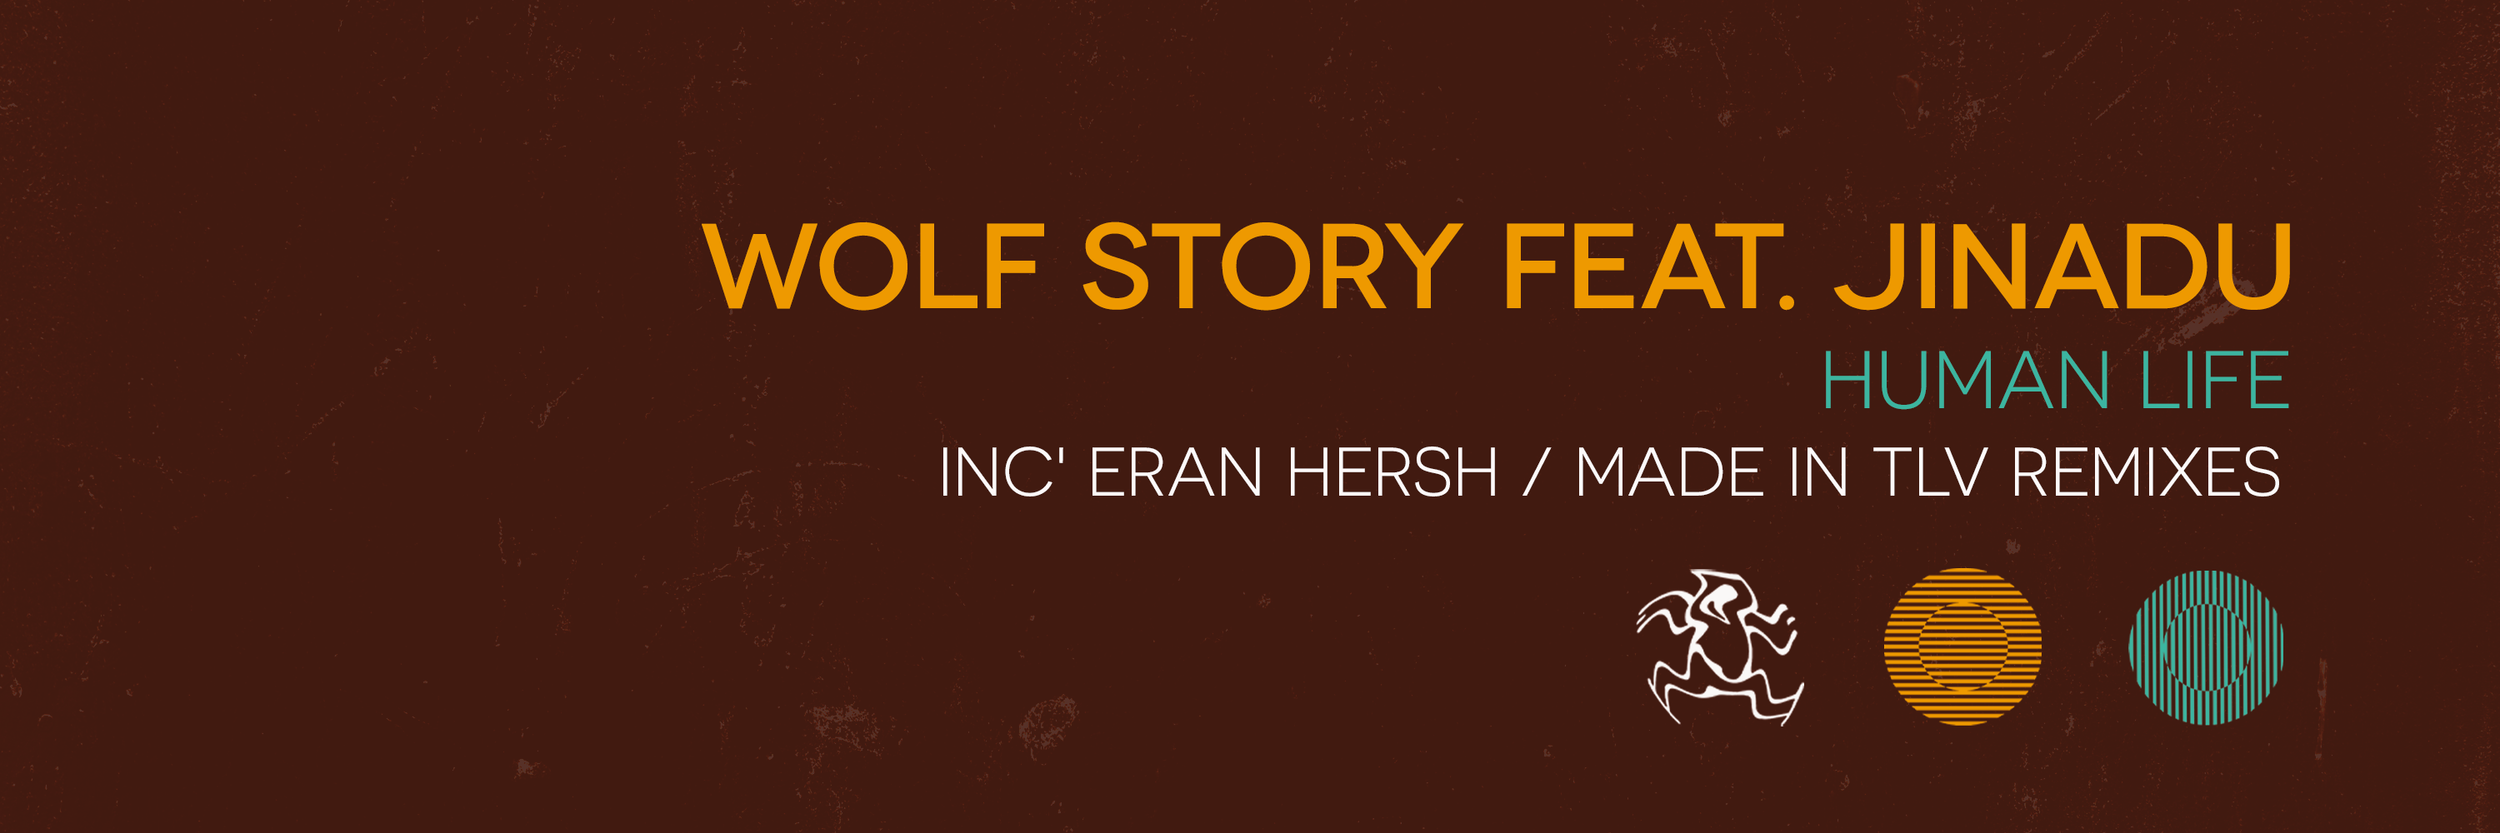 WOLF STORY TWITTER BANNER.png